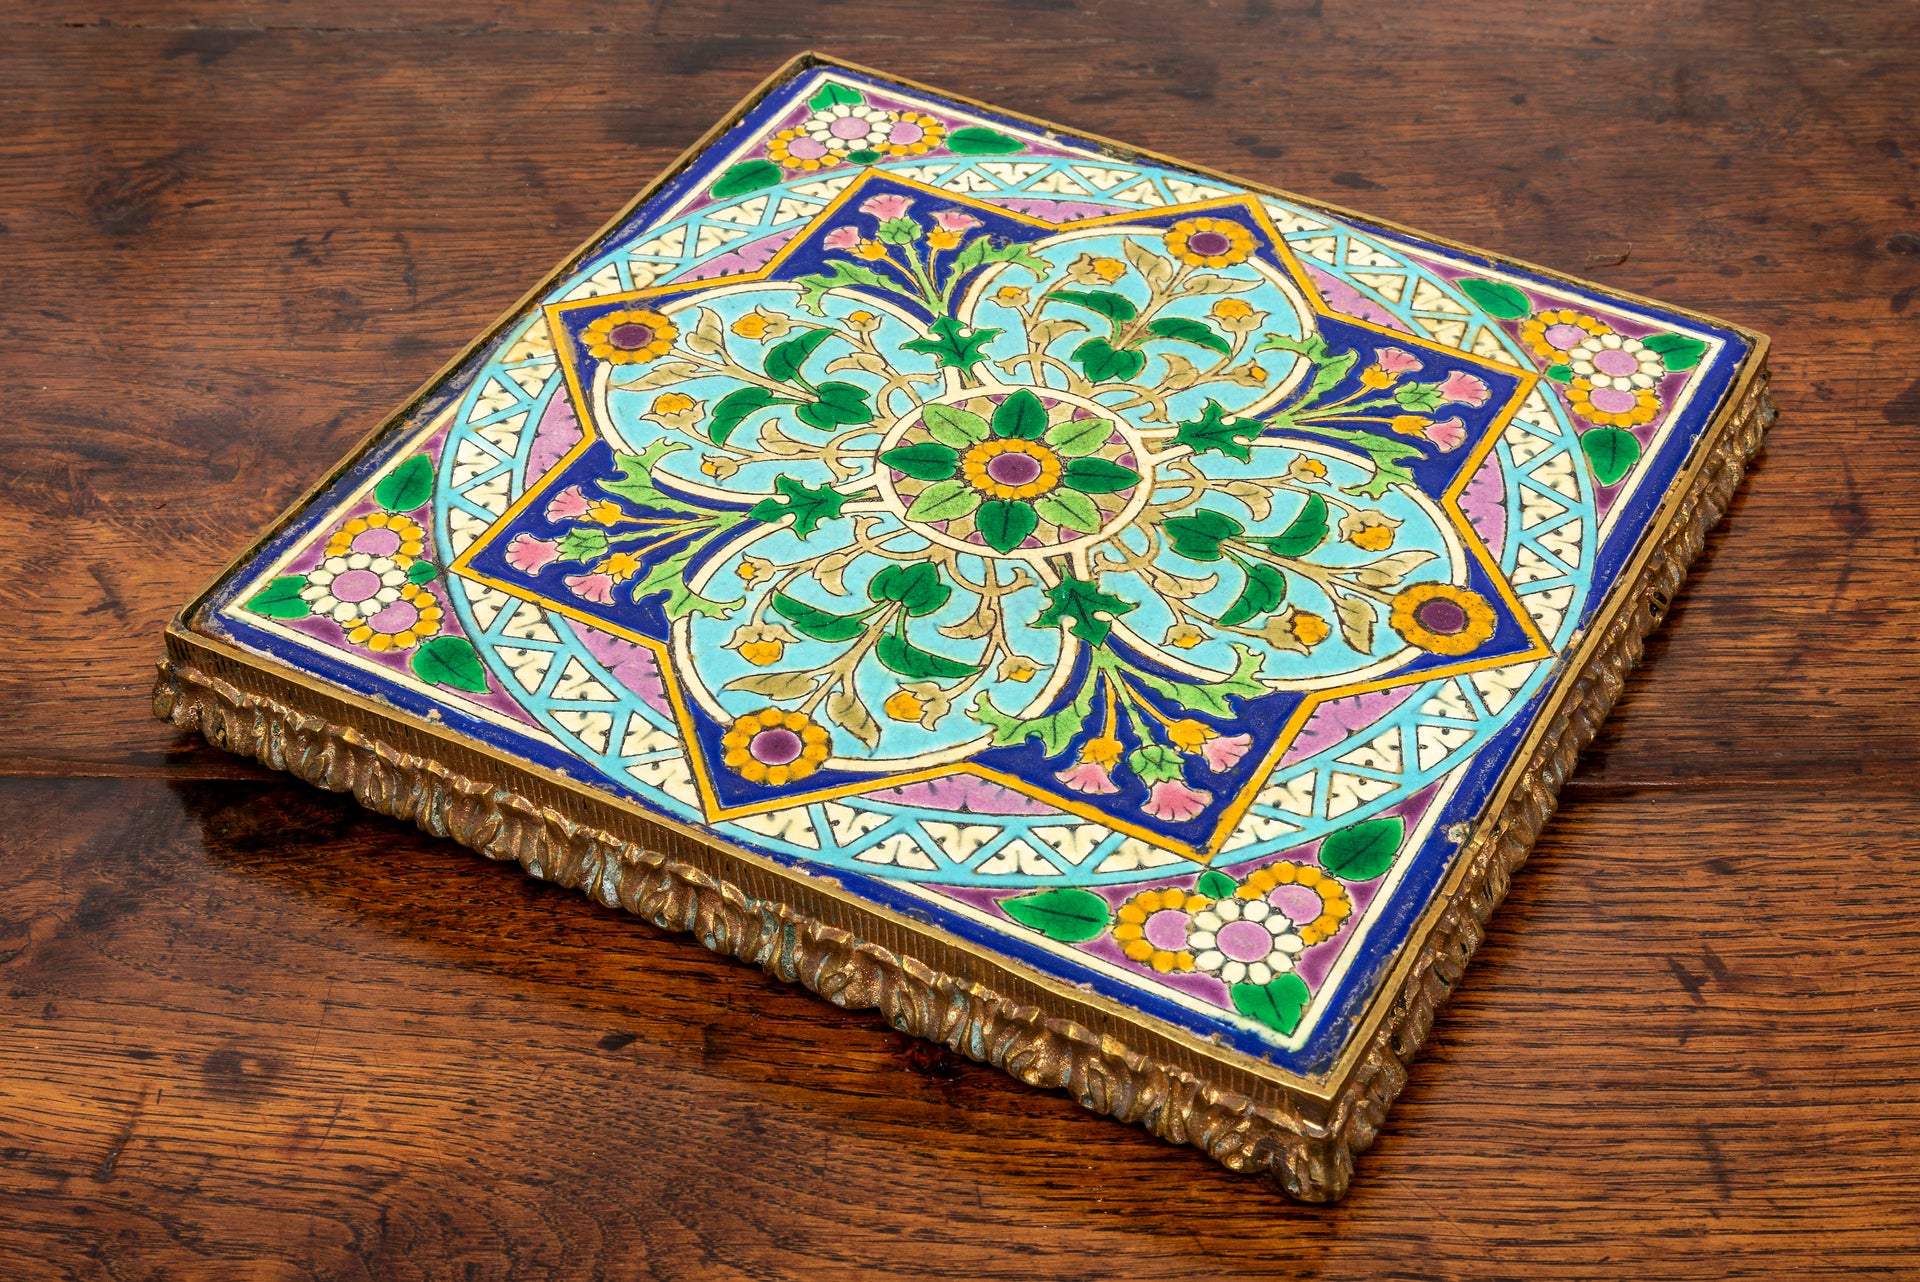 SOLD A very beautiful and decorative tile trivet by Gien, French 19th Century